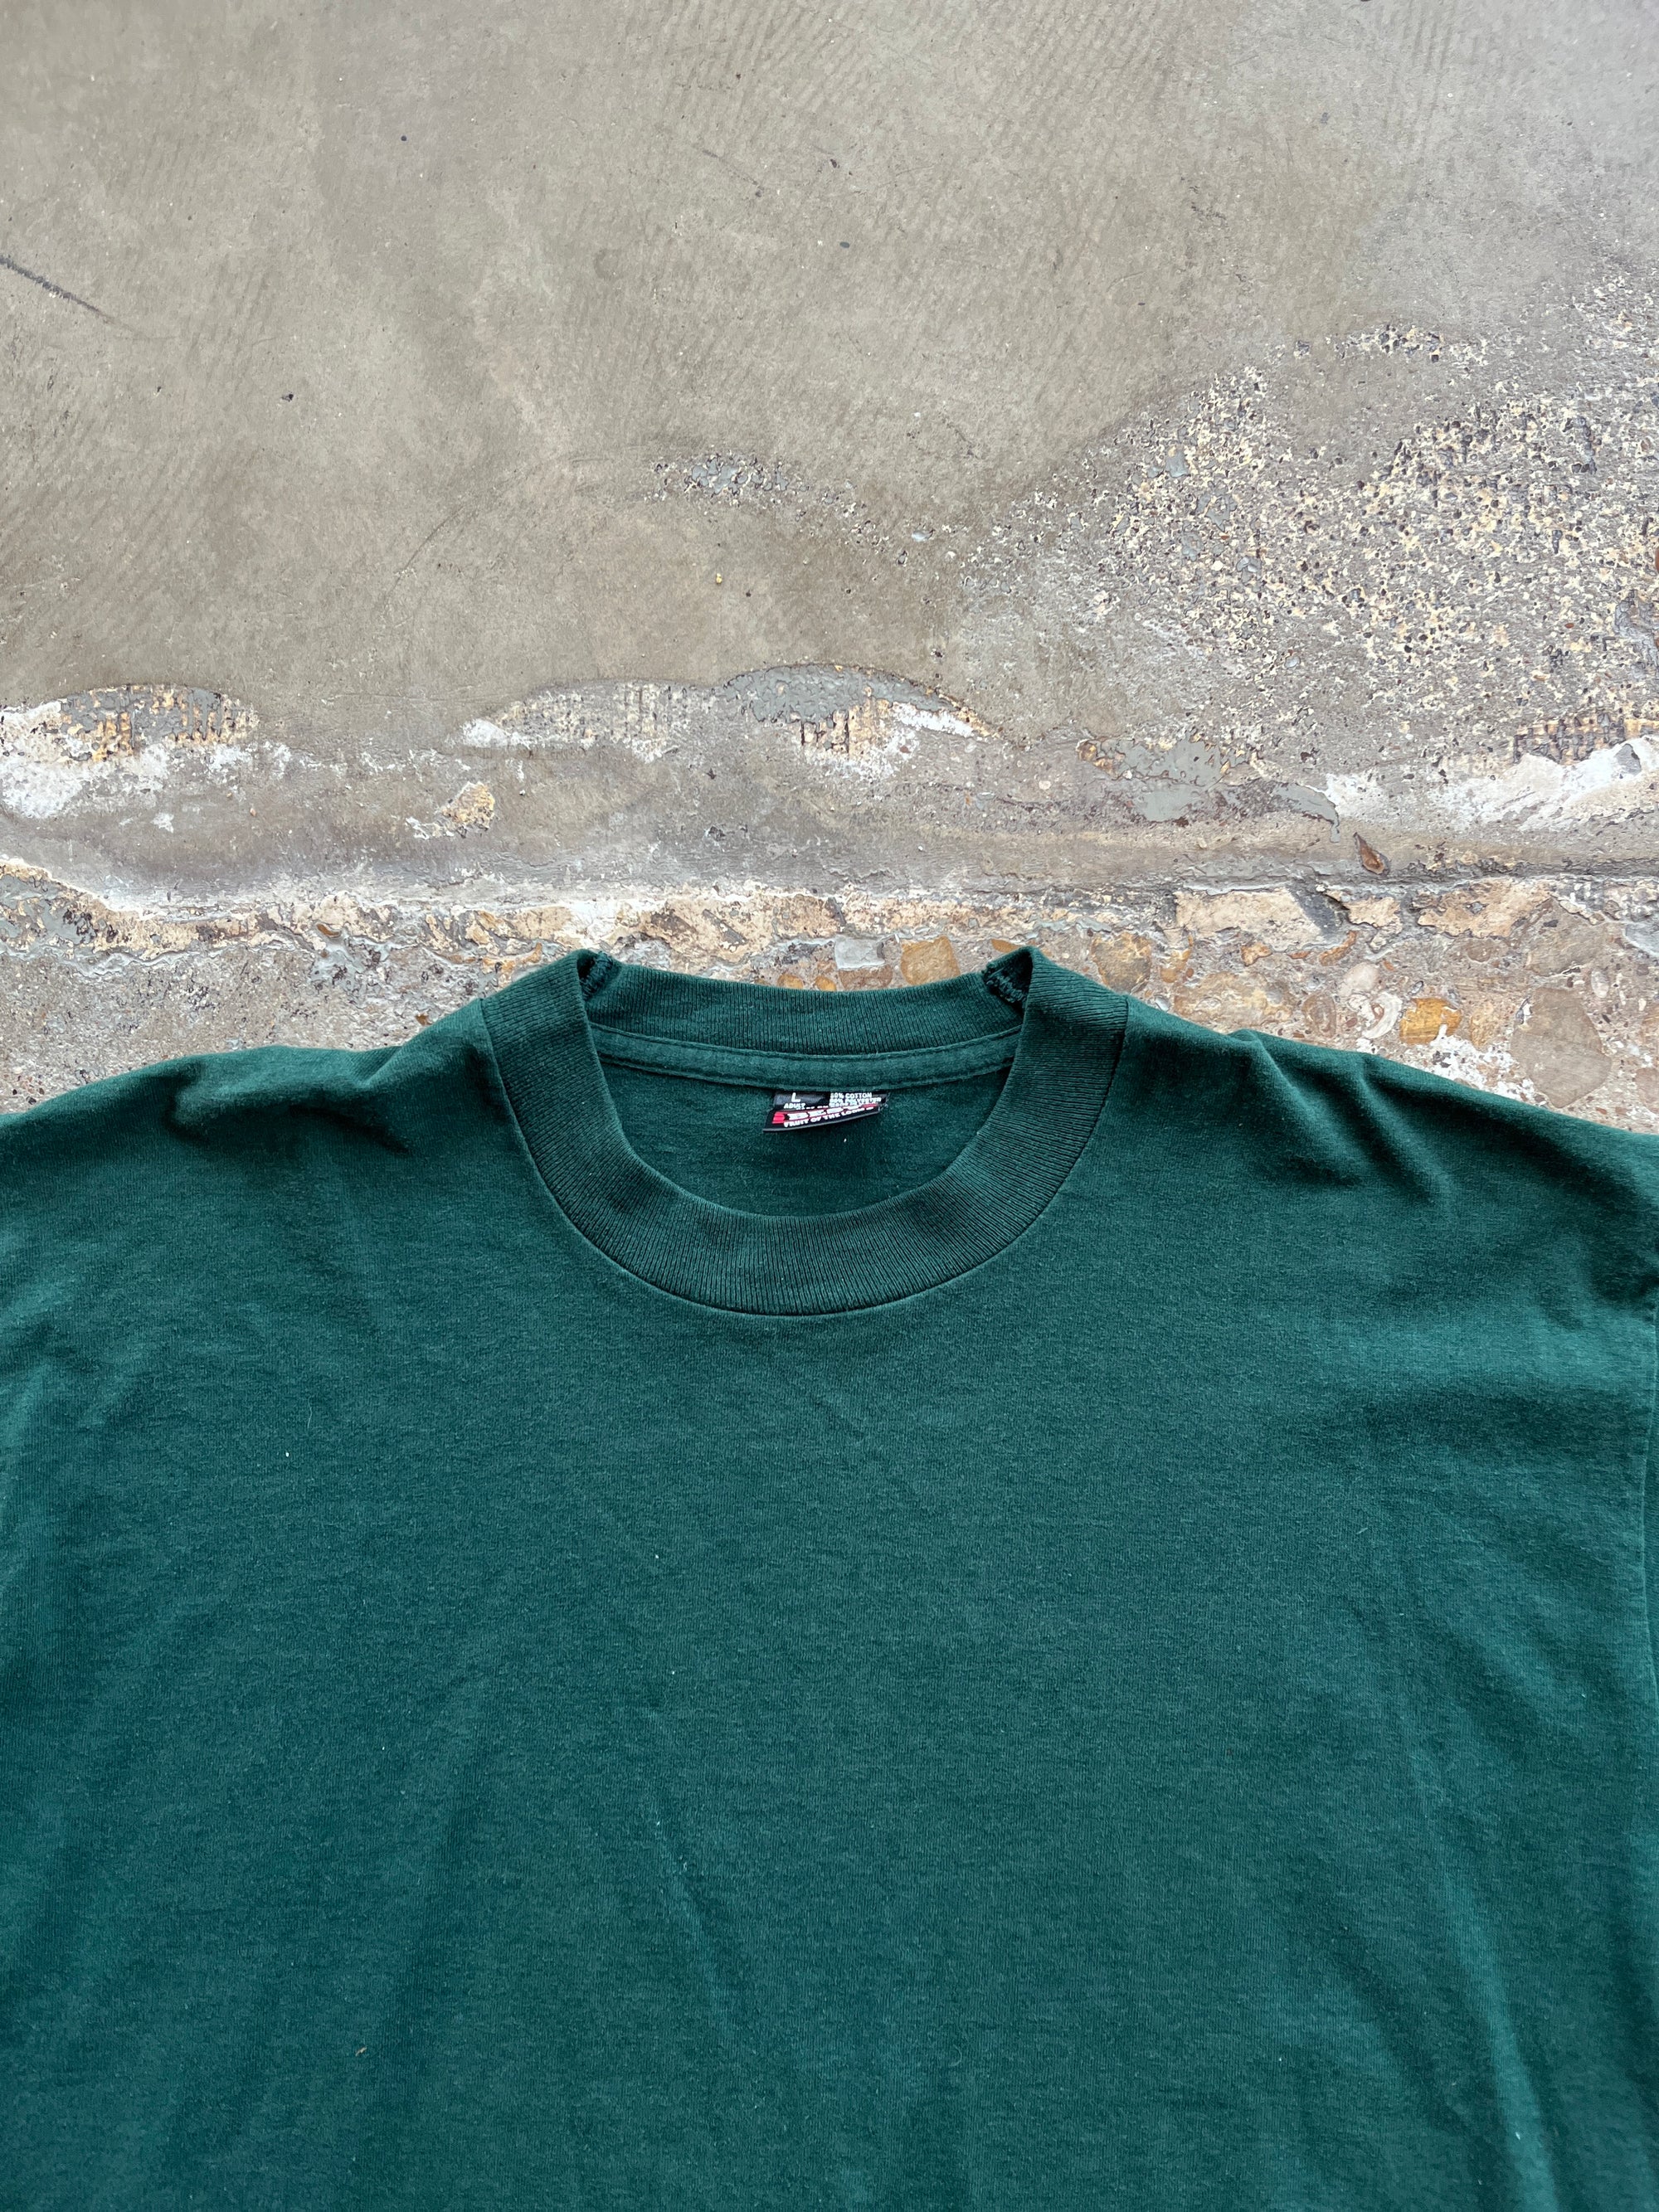 Forest Green Blank Tee